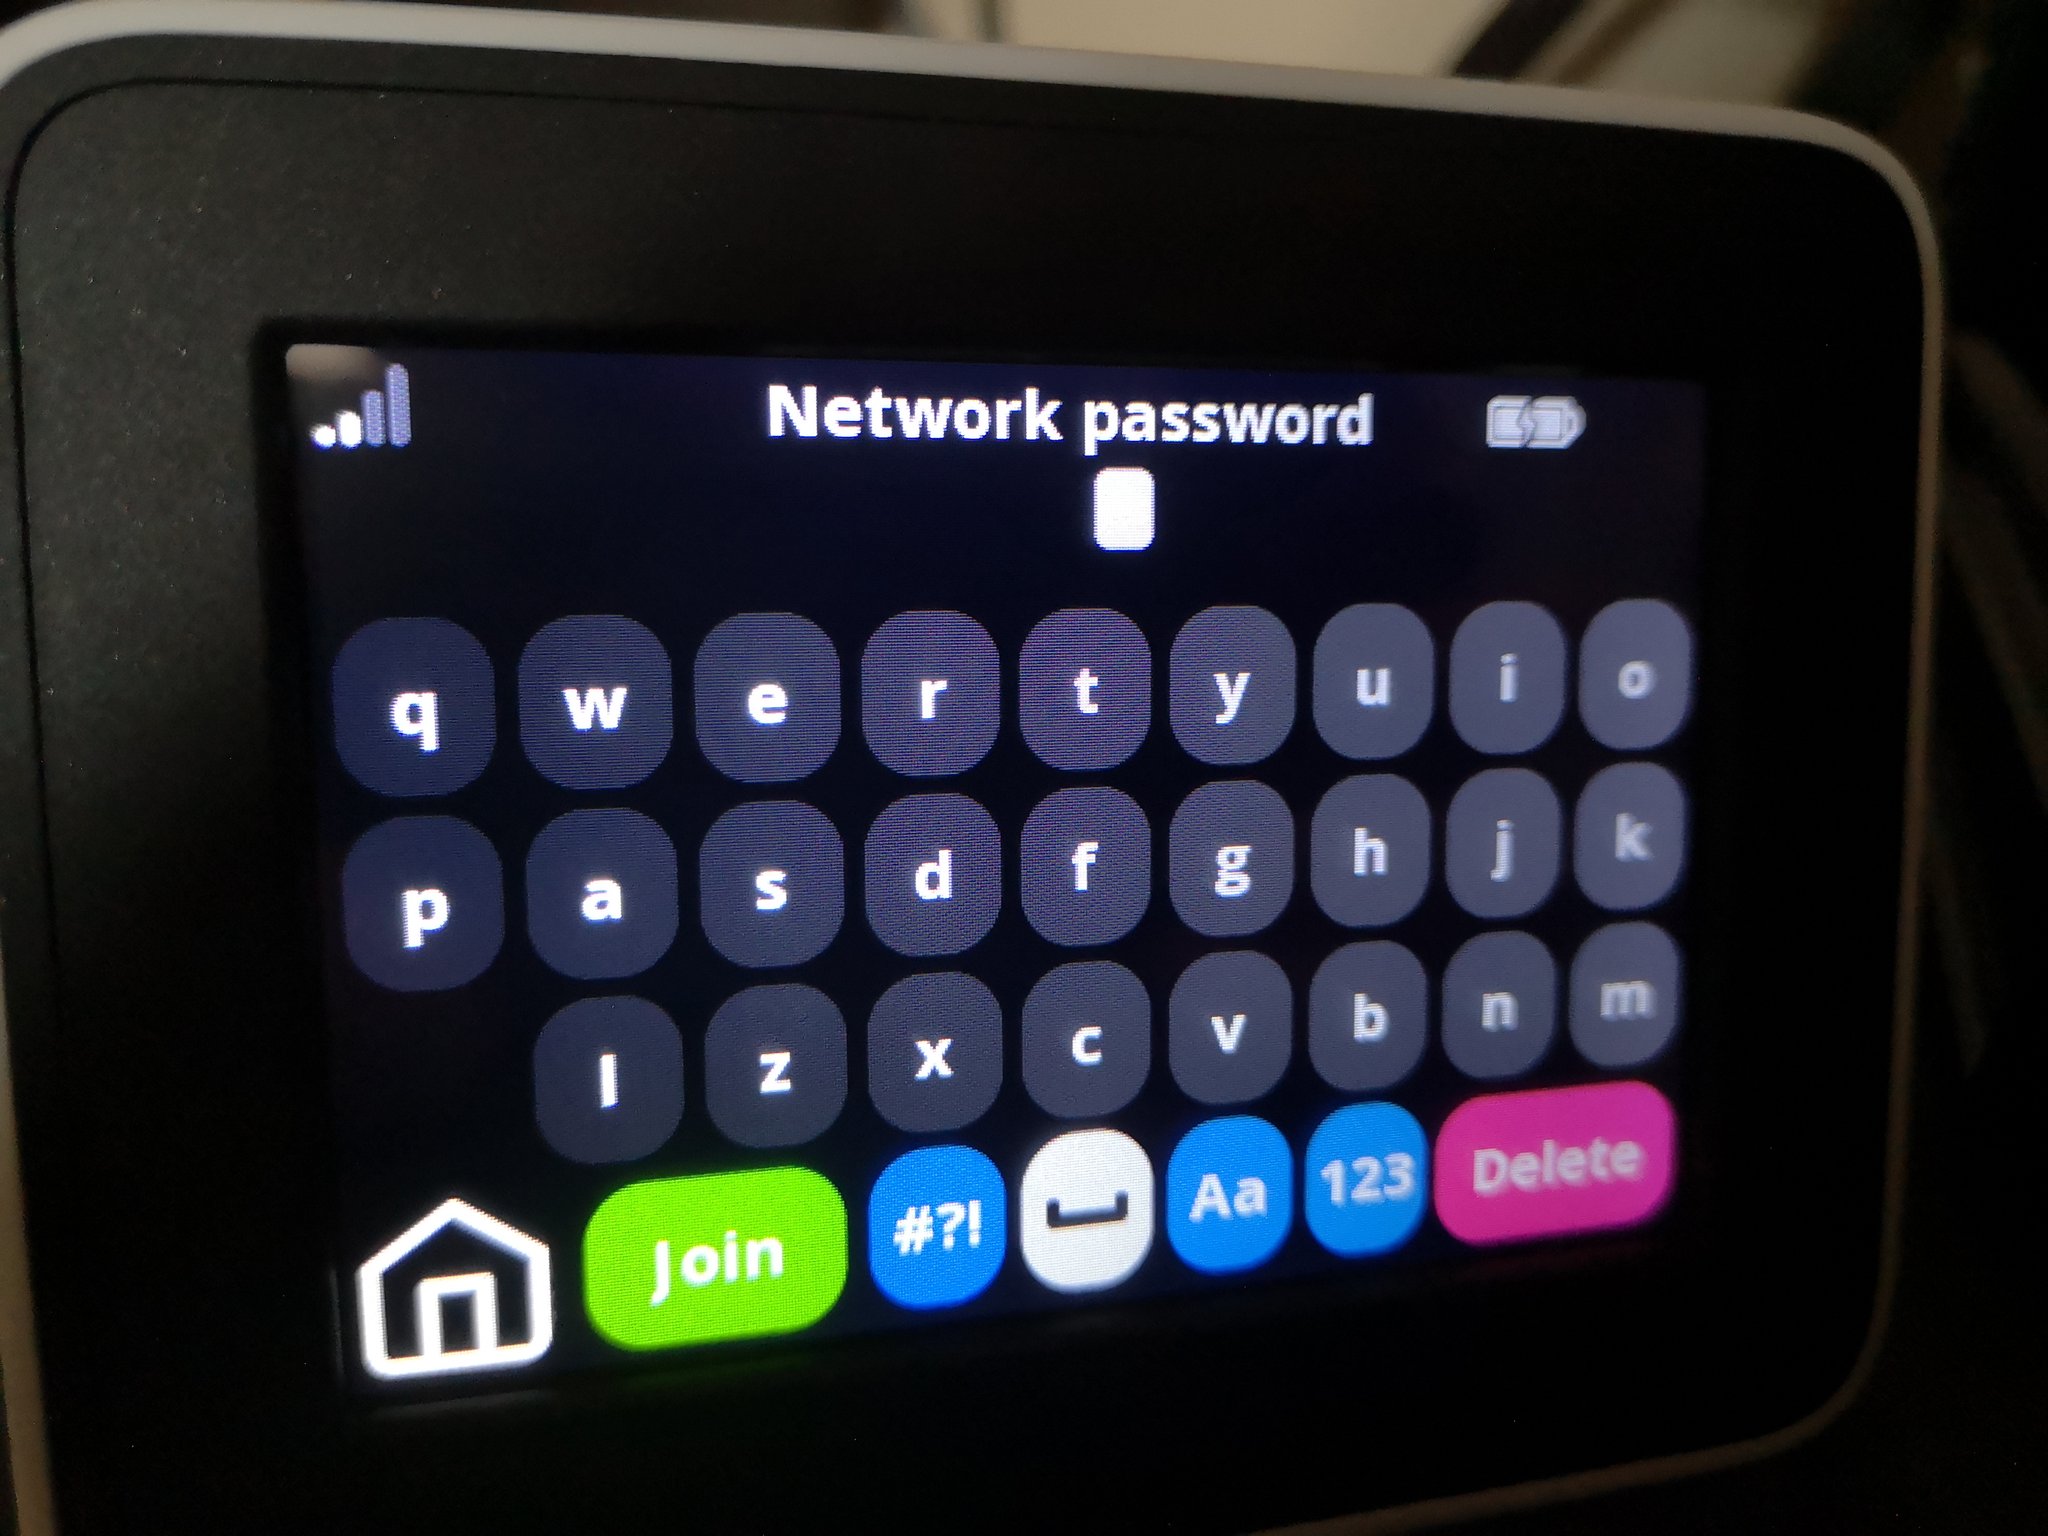 A smart meter display showing a butchered ‘qwerty’ keyboard to input a wifi password (source: @cabe_bedlam)